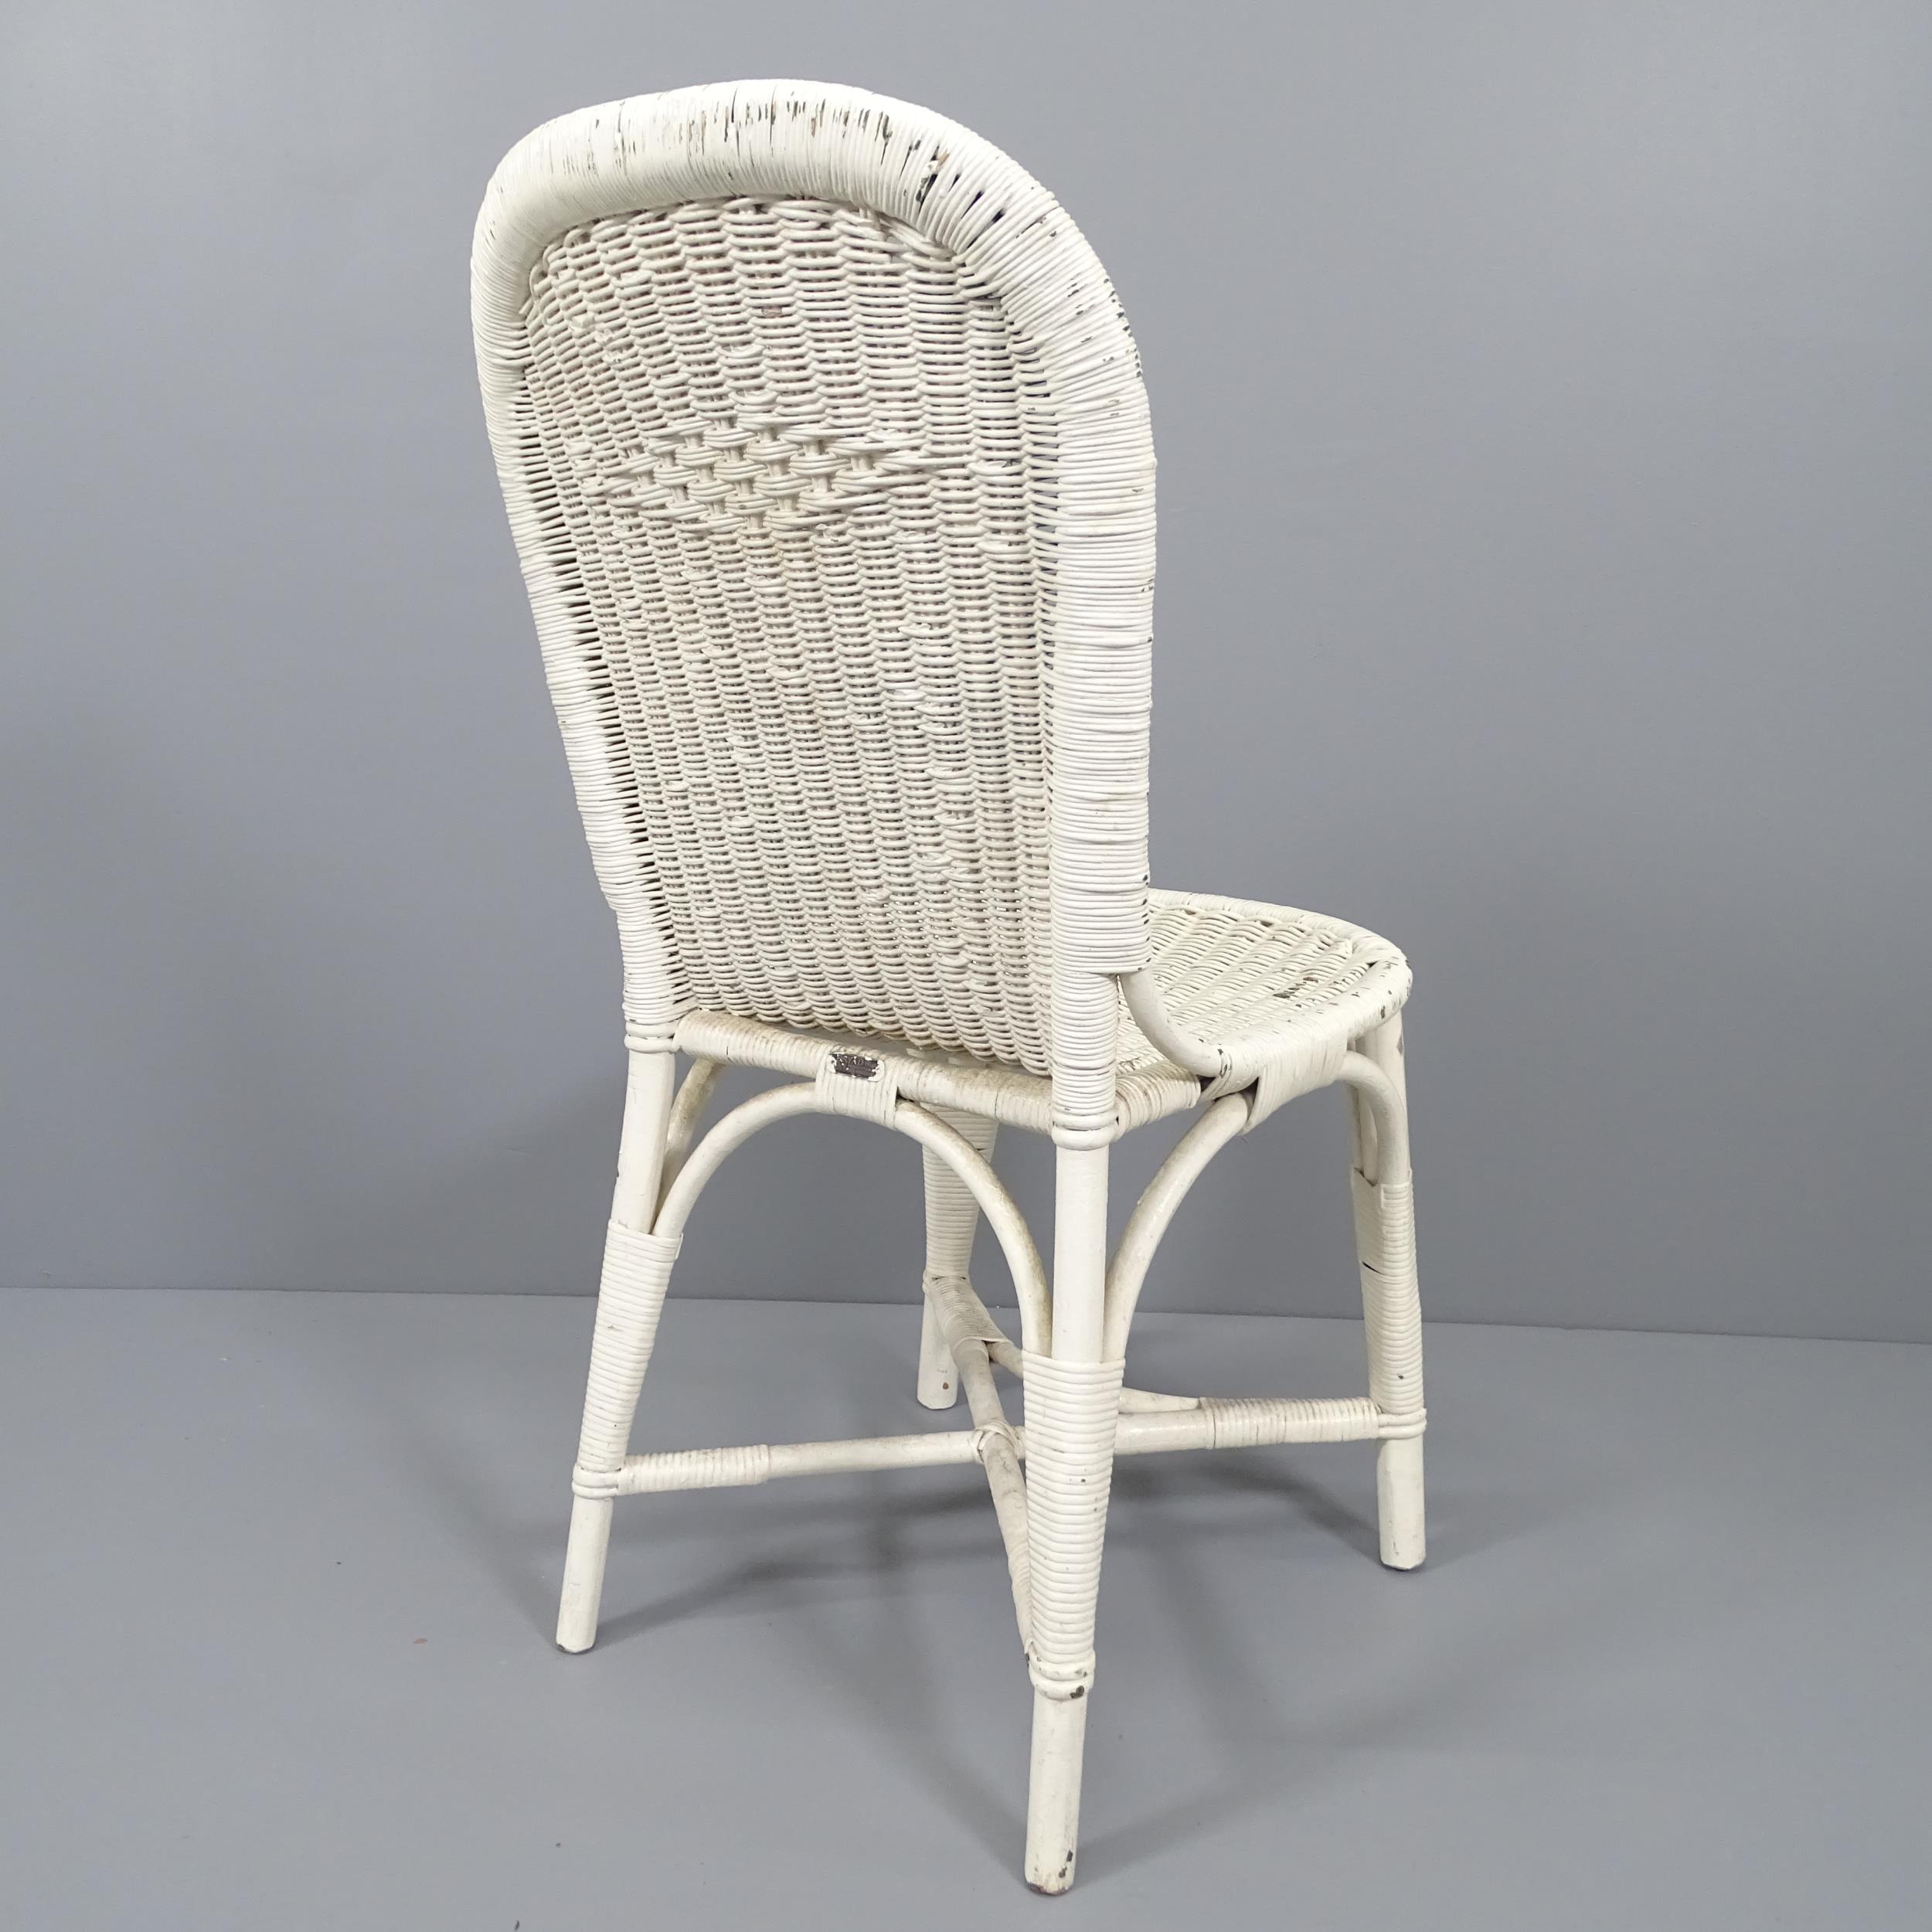 An early 20th century wicker chair by Dryad of Leicester with maker’s metal label - Image 2 of 2